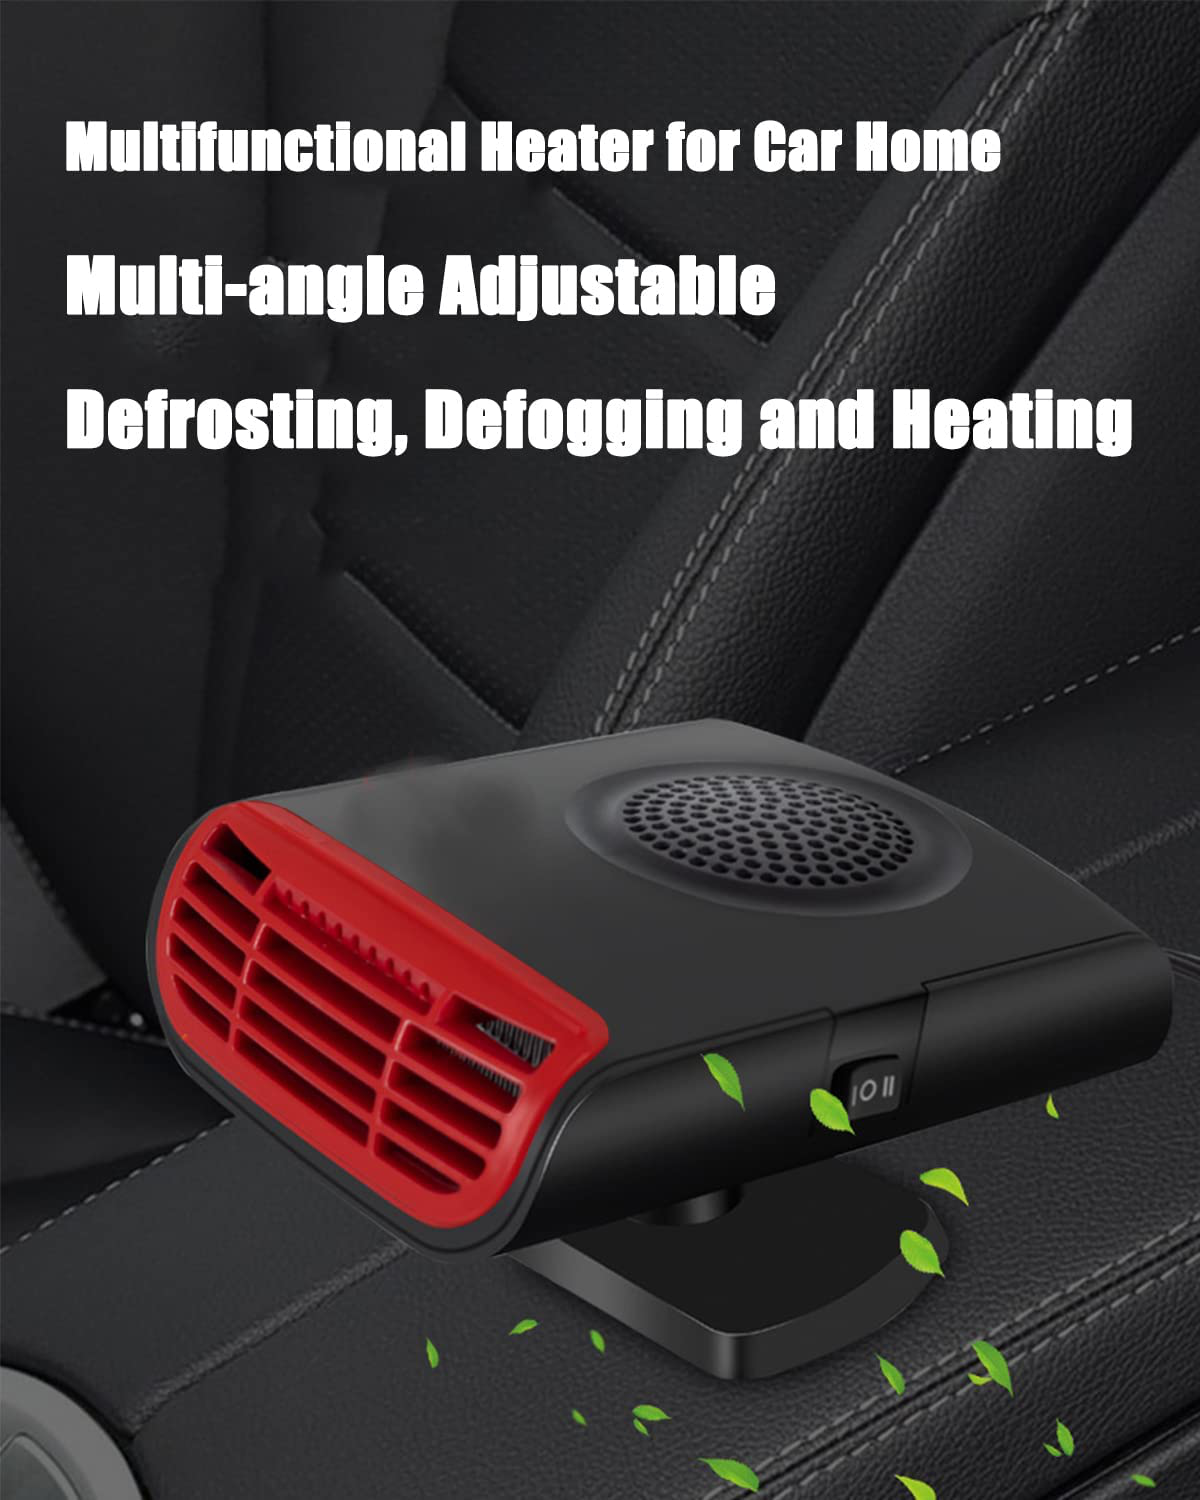 Mutifunctional Car Heater, 12V 150W Fast Heating and Cooling, 360 Degree Rotary, Defrost Car Heating Fan for Vehicle Car Auto Home